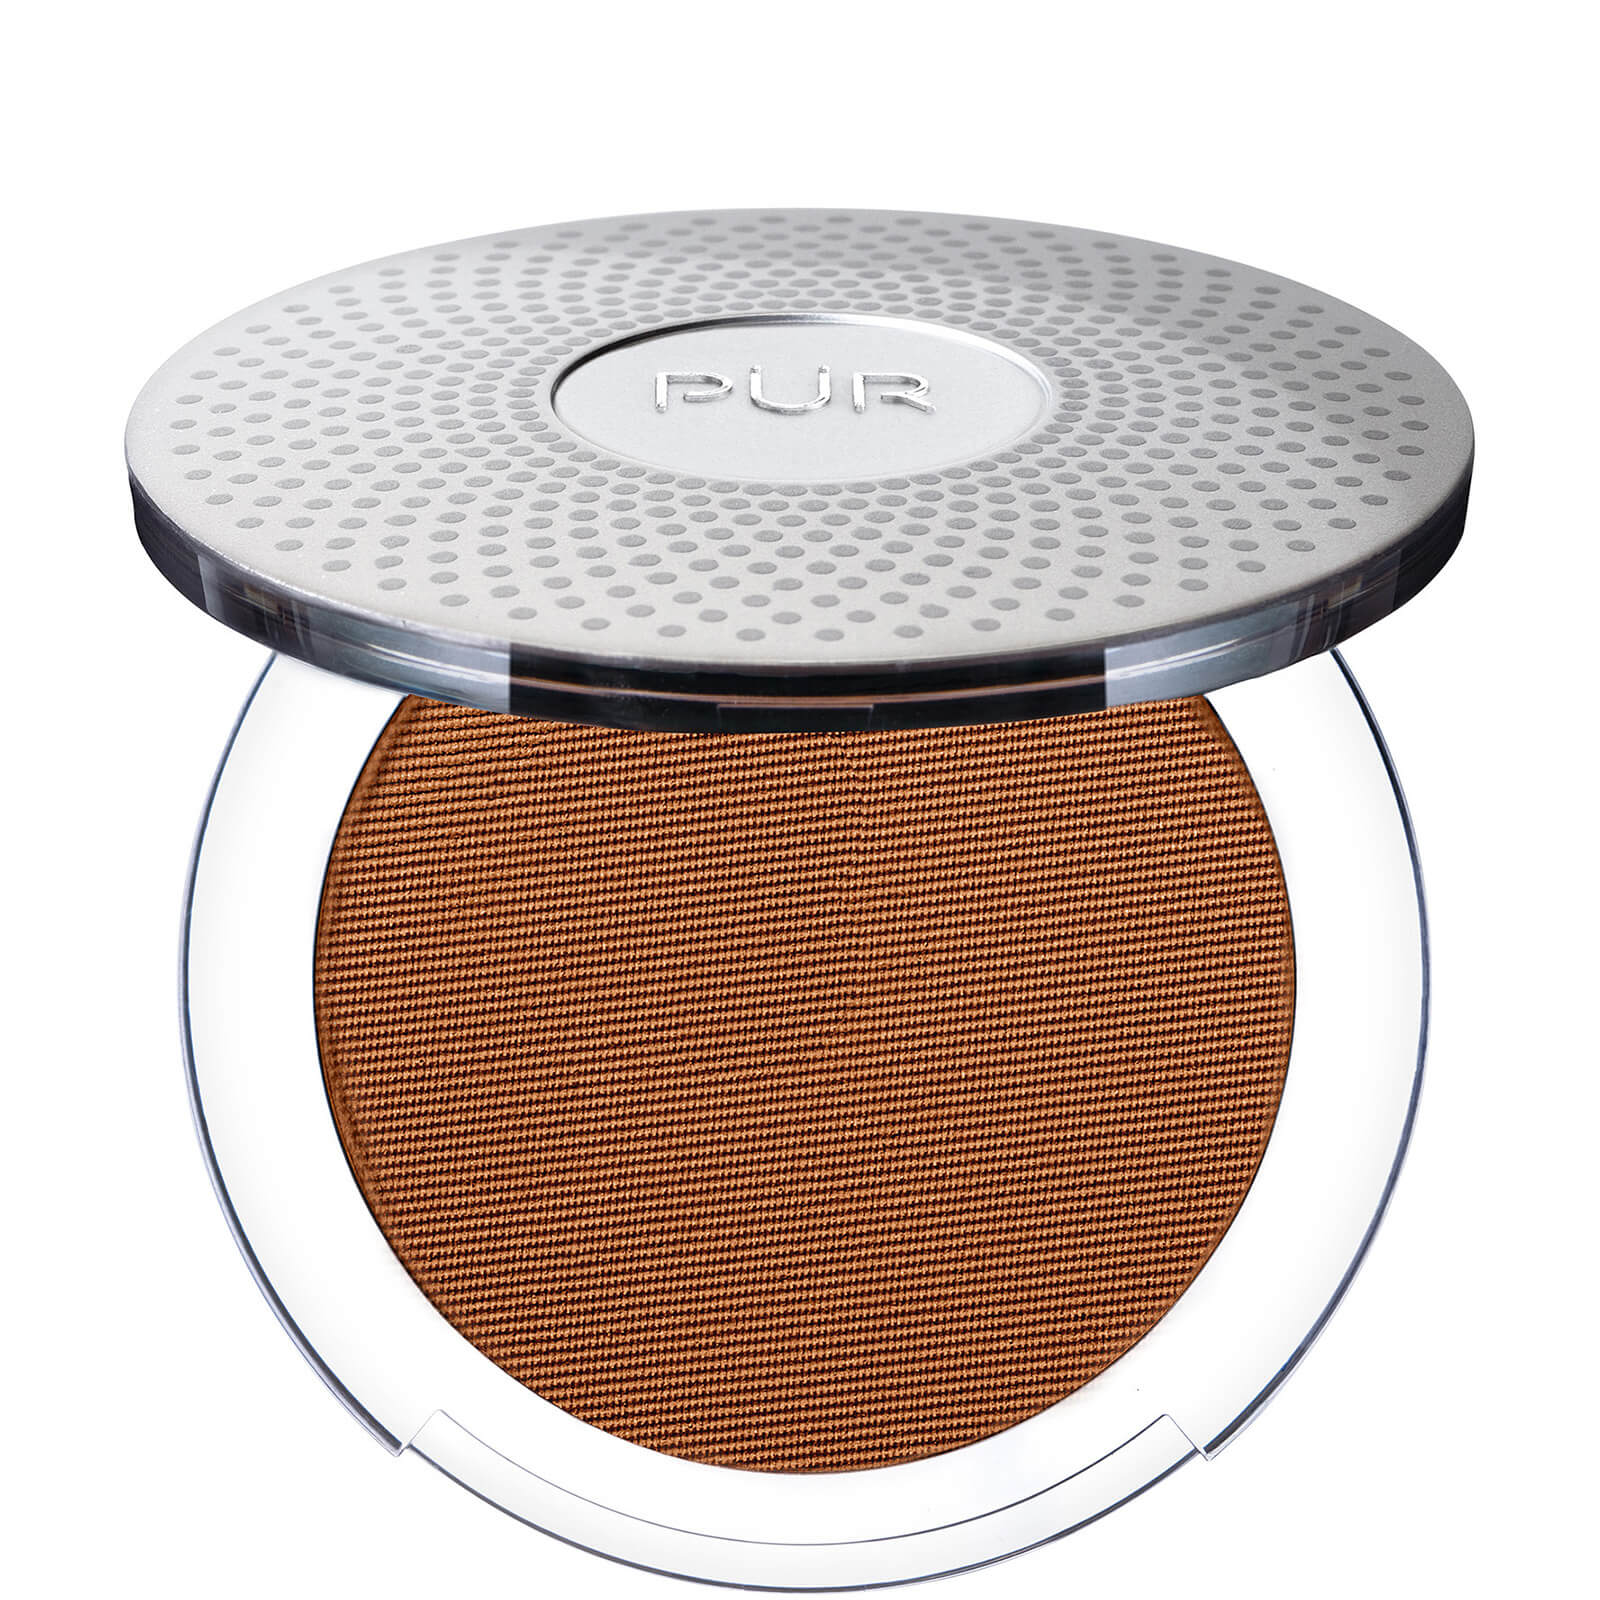 Pür 4-in-1 Pressed Mineral Make-up 8g (various Shades) In Dn5/cinnamon